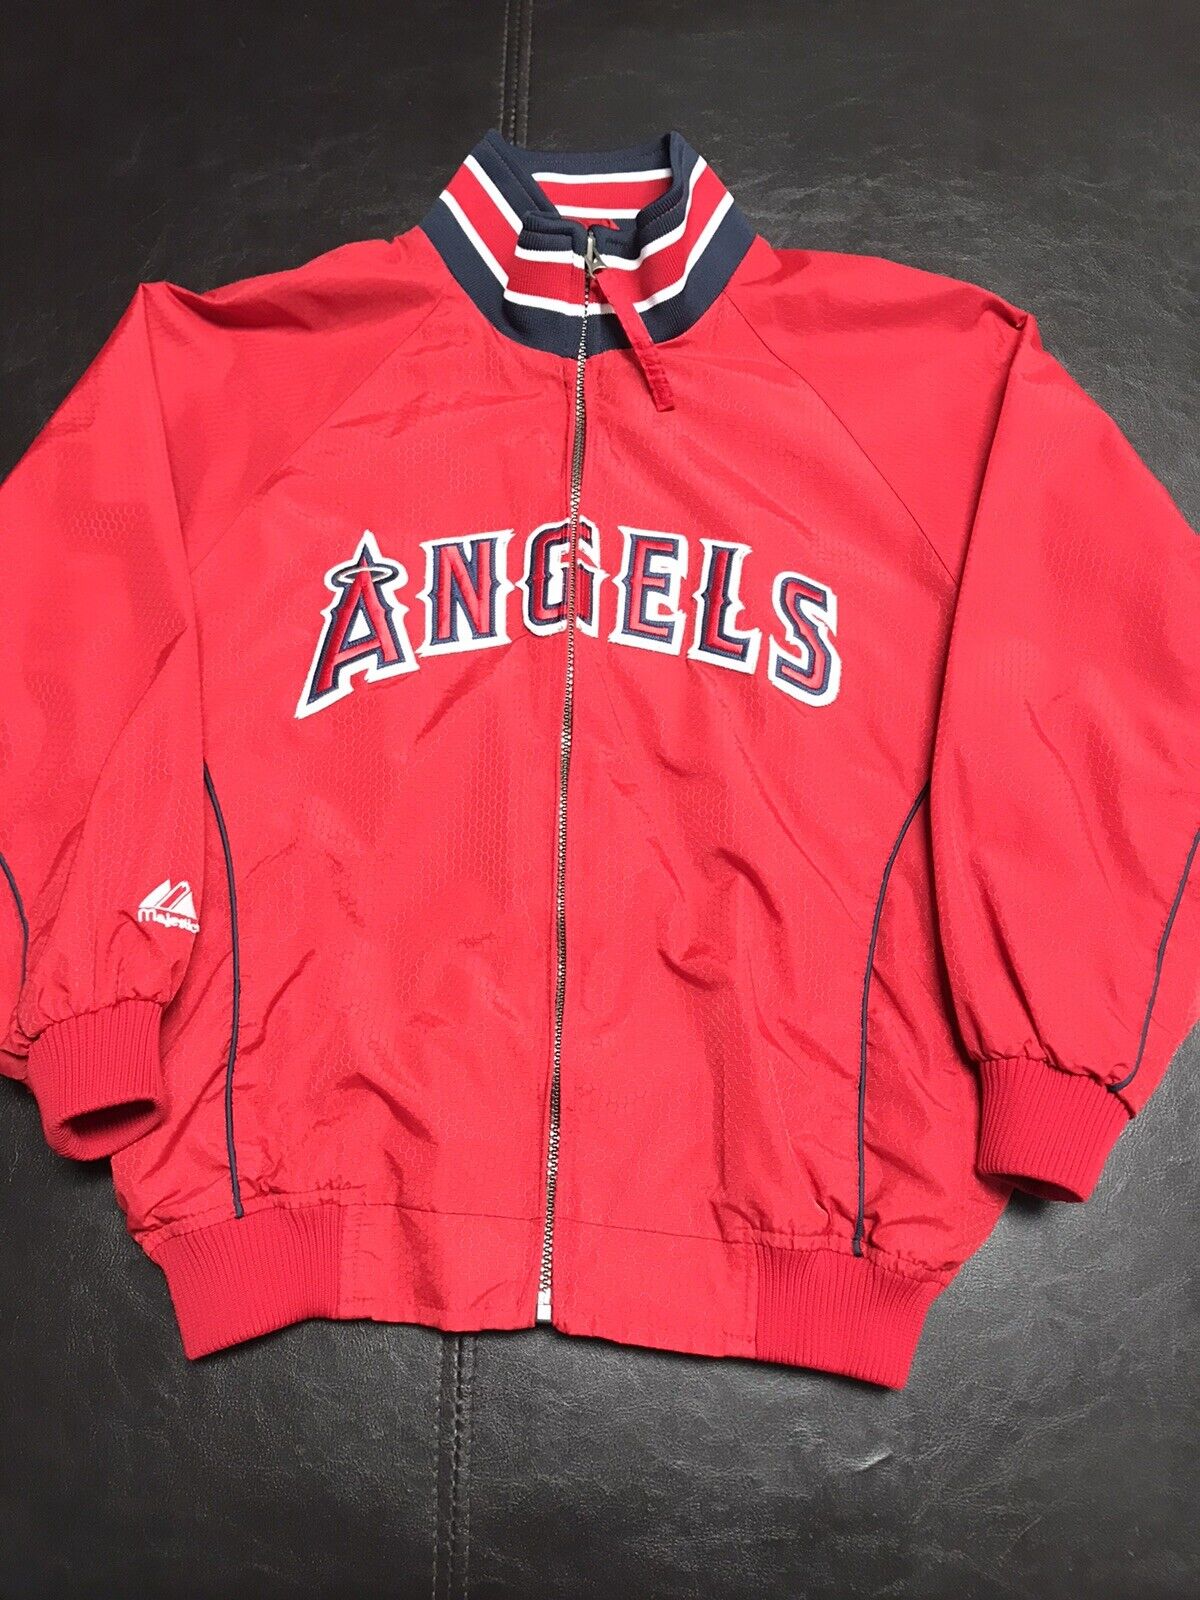 Women’s Los Angeles Angels MLB Majestic Authentic Collection Jacket Size MEDIUM